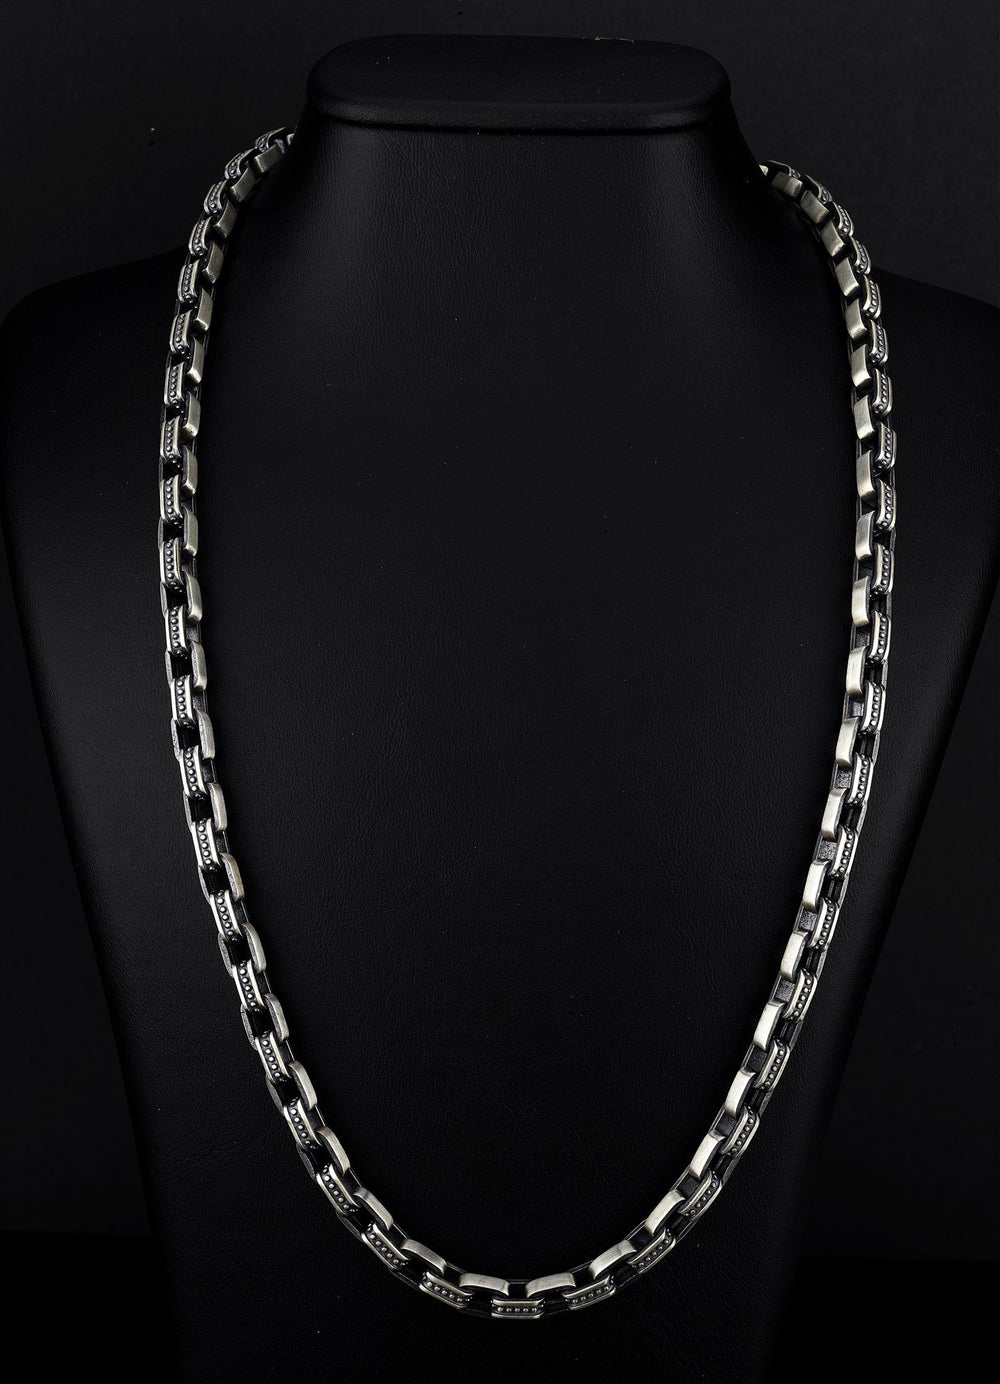 5mm Italian Triple Rope Chain 925 Sterling Silver, 24 inches